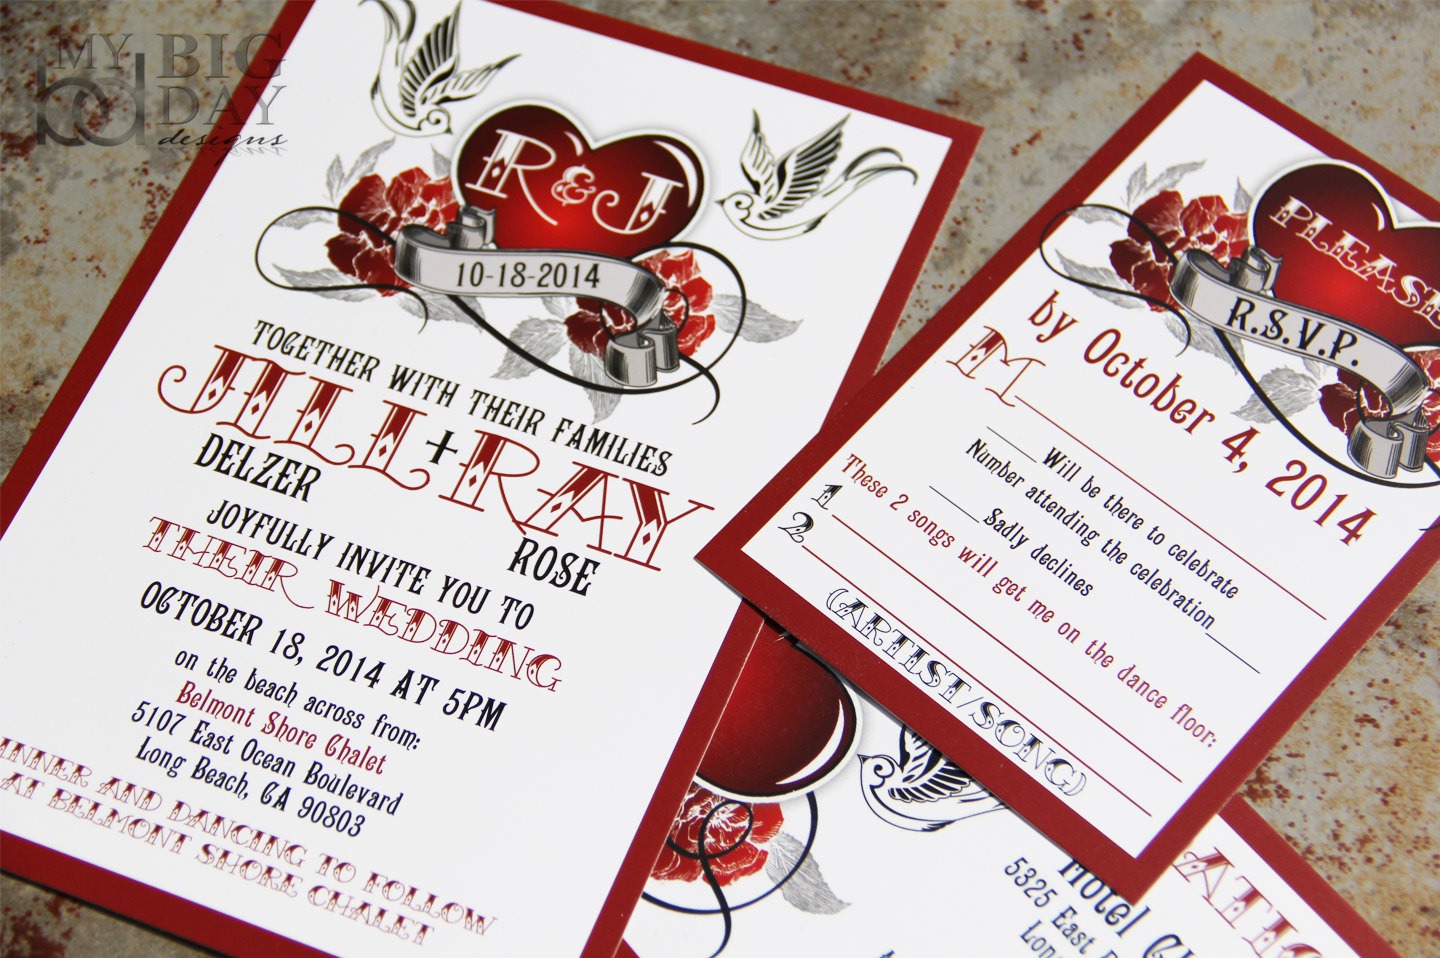 Rockabilly Wedding Invitation Set with sparrow lovebirds and roses. Steampunk heart wedding invitations. steampunk buy now online